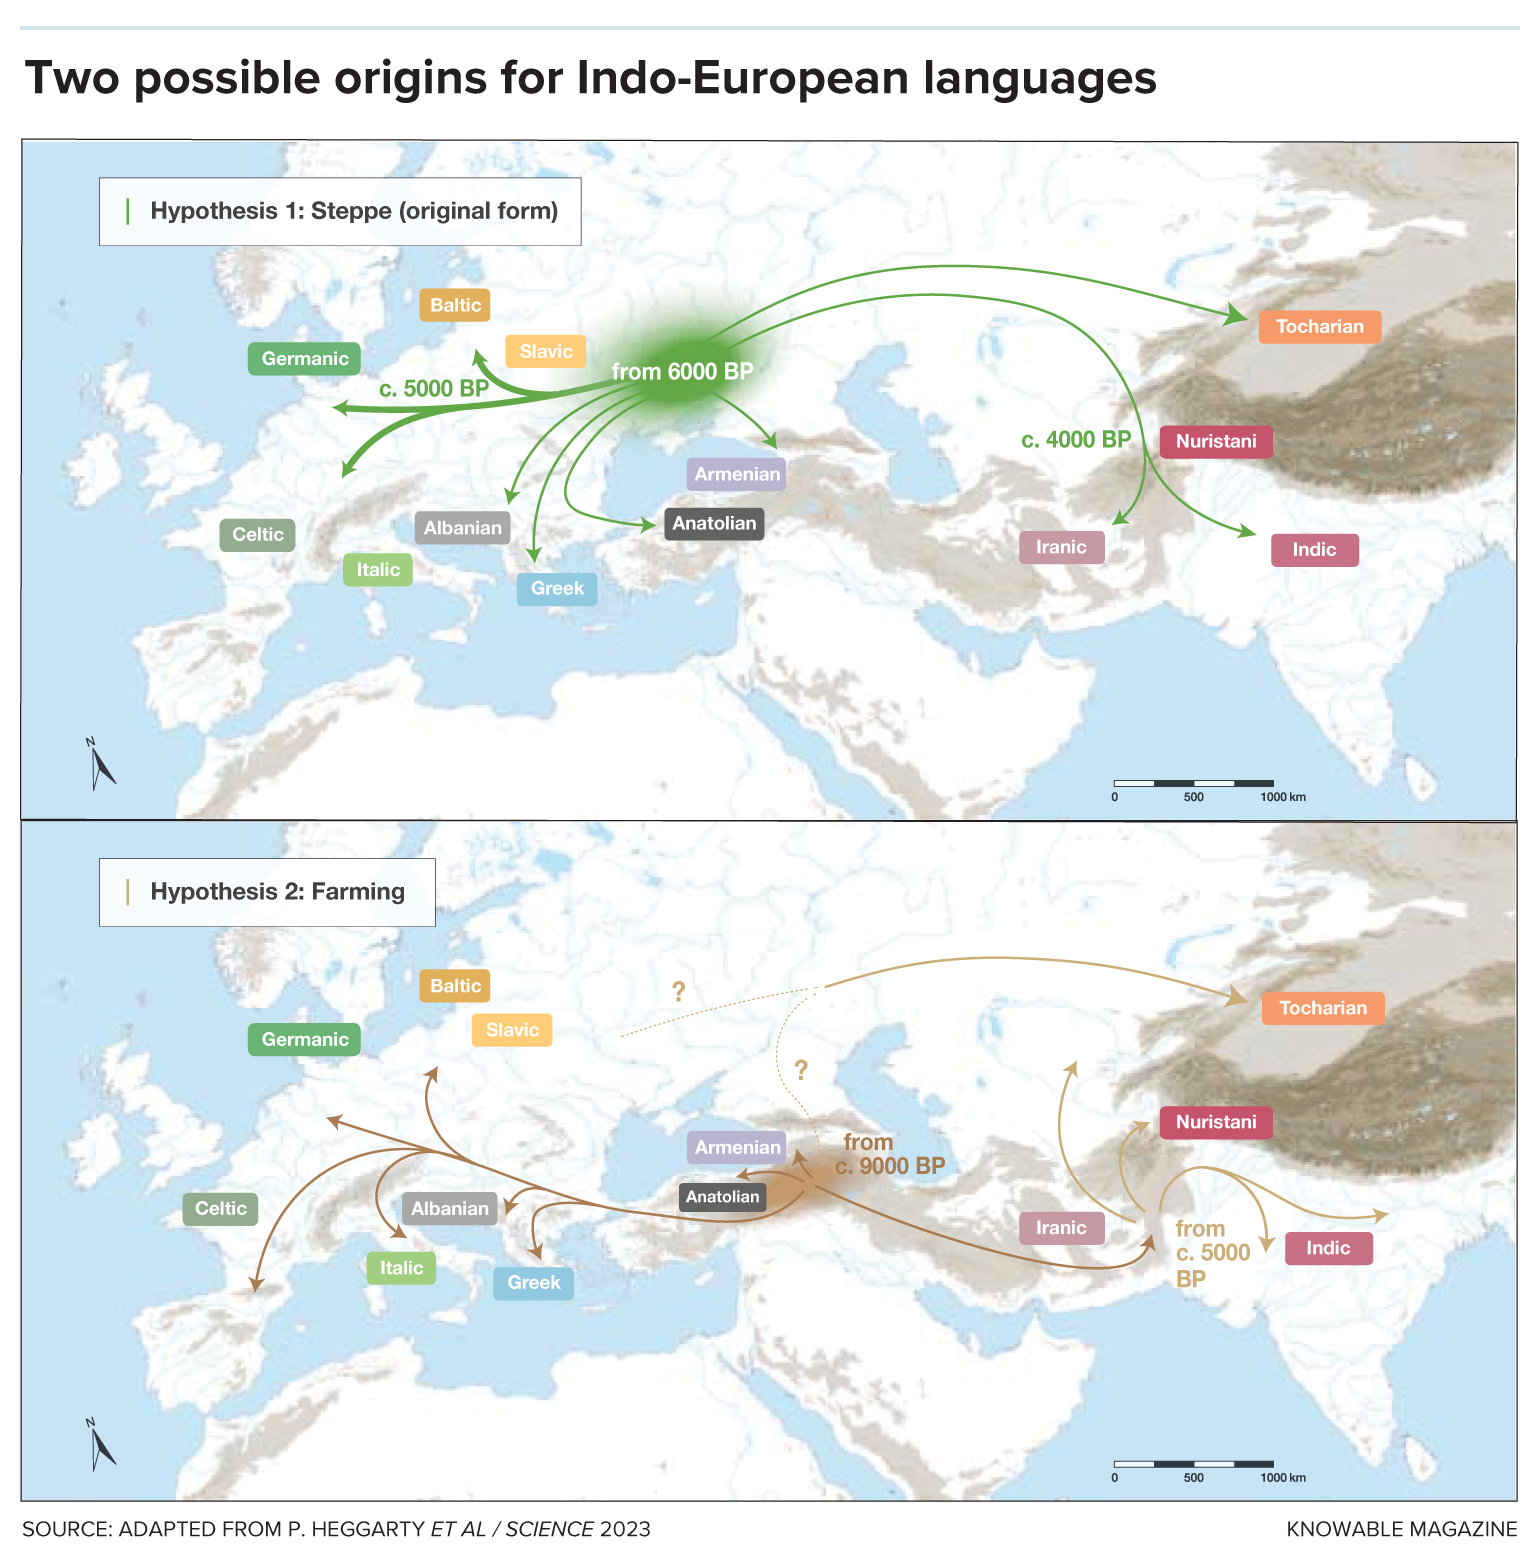 A map of Europe and Asia illustrated two possible origins of Indo-European.